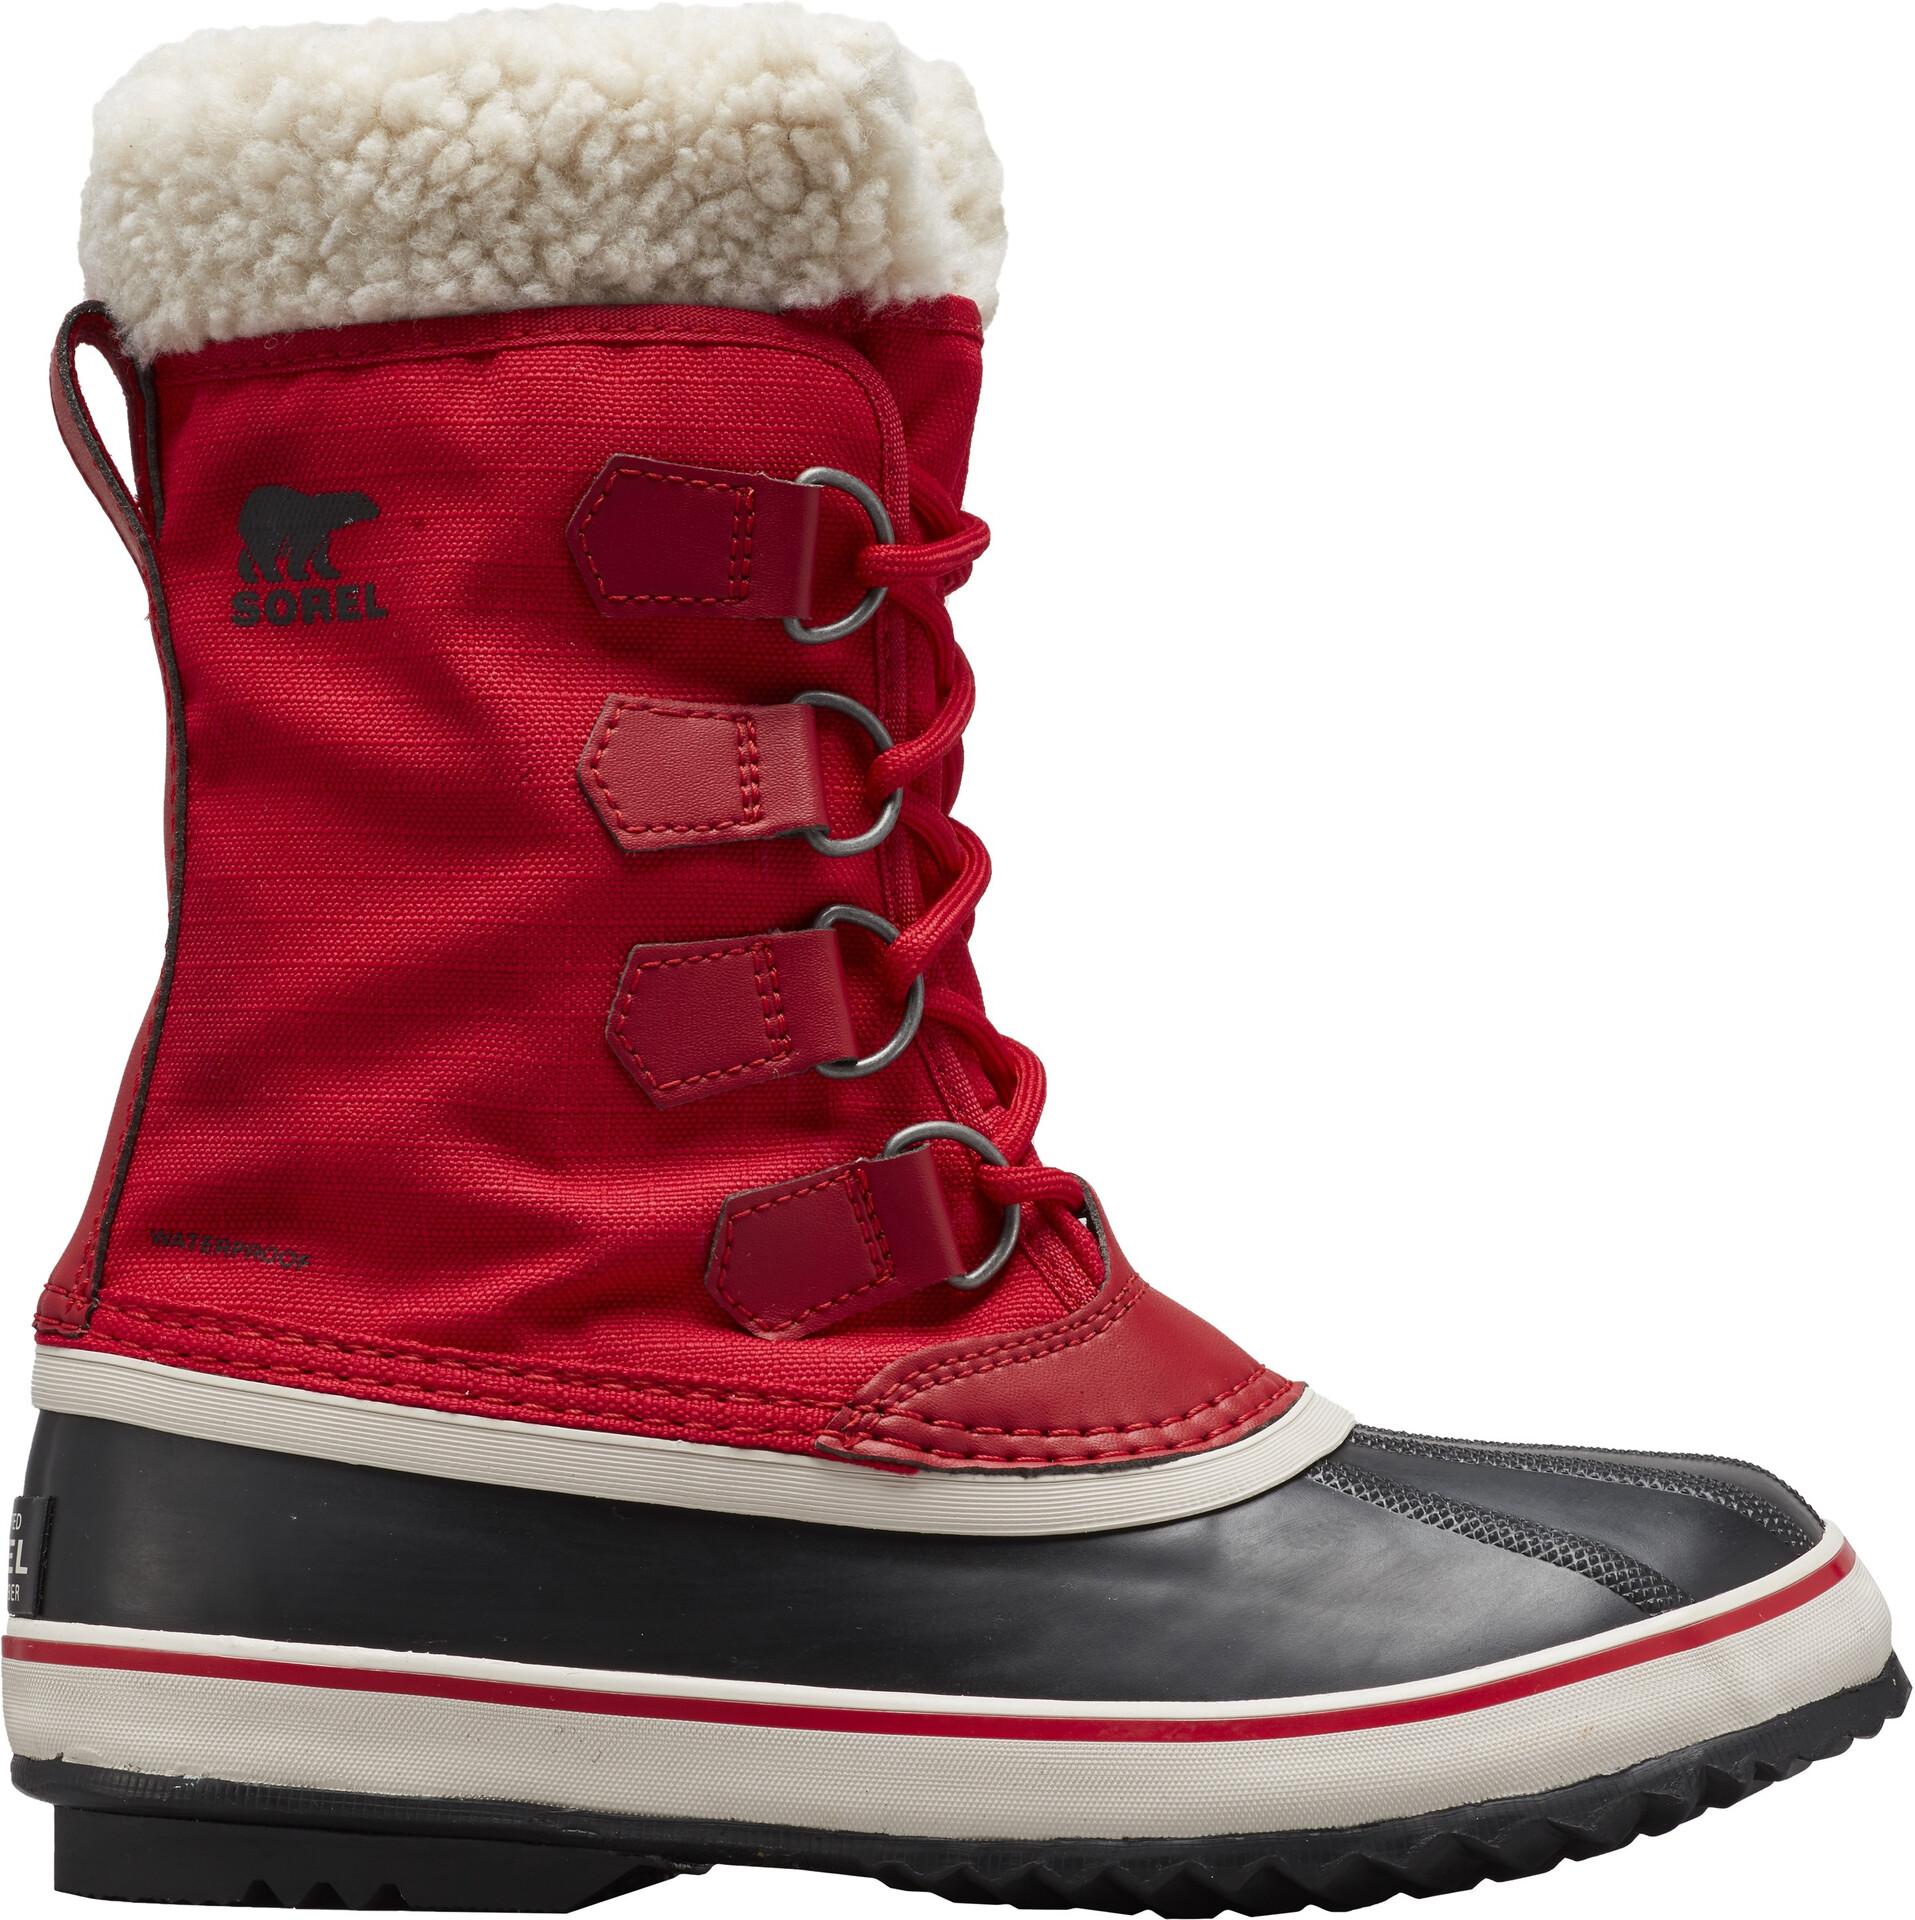 shoe carnival red boots